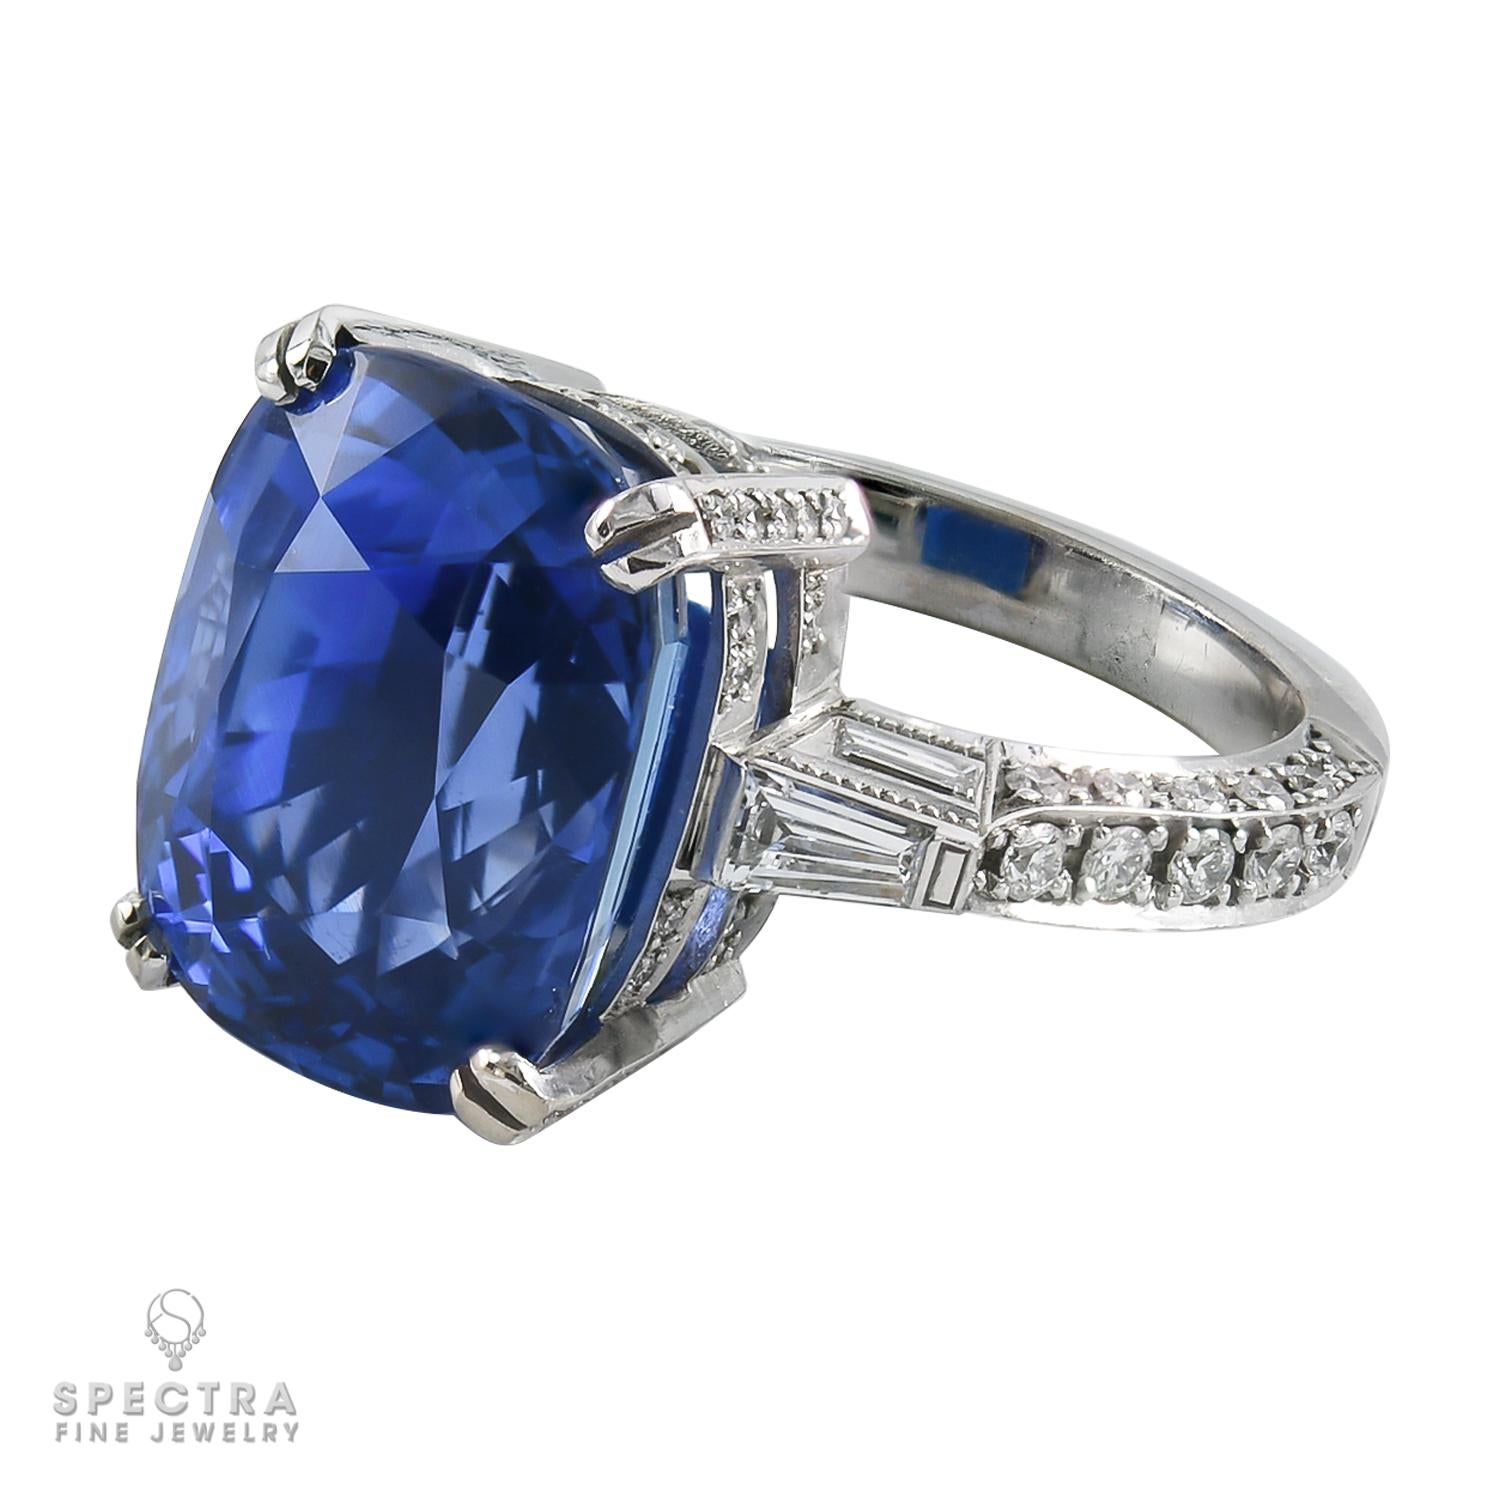 This stunning cocktail ring from Spectra Fine Jewelry is a versatile statement piece that can be worn as an engagement or celebration ring. Crafted in the 2010s, the ring features a magnificent 16.33-carat natural sapphire of Sri Lanka origin, with